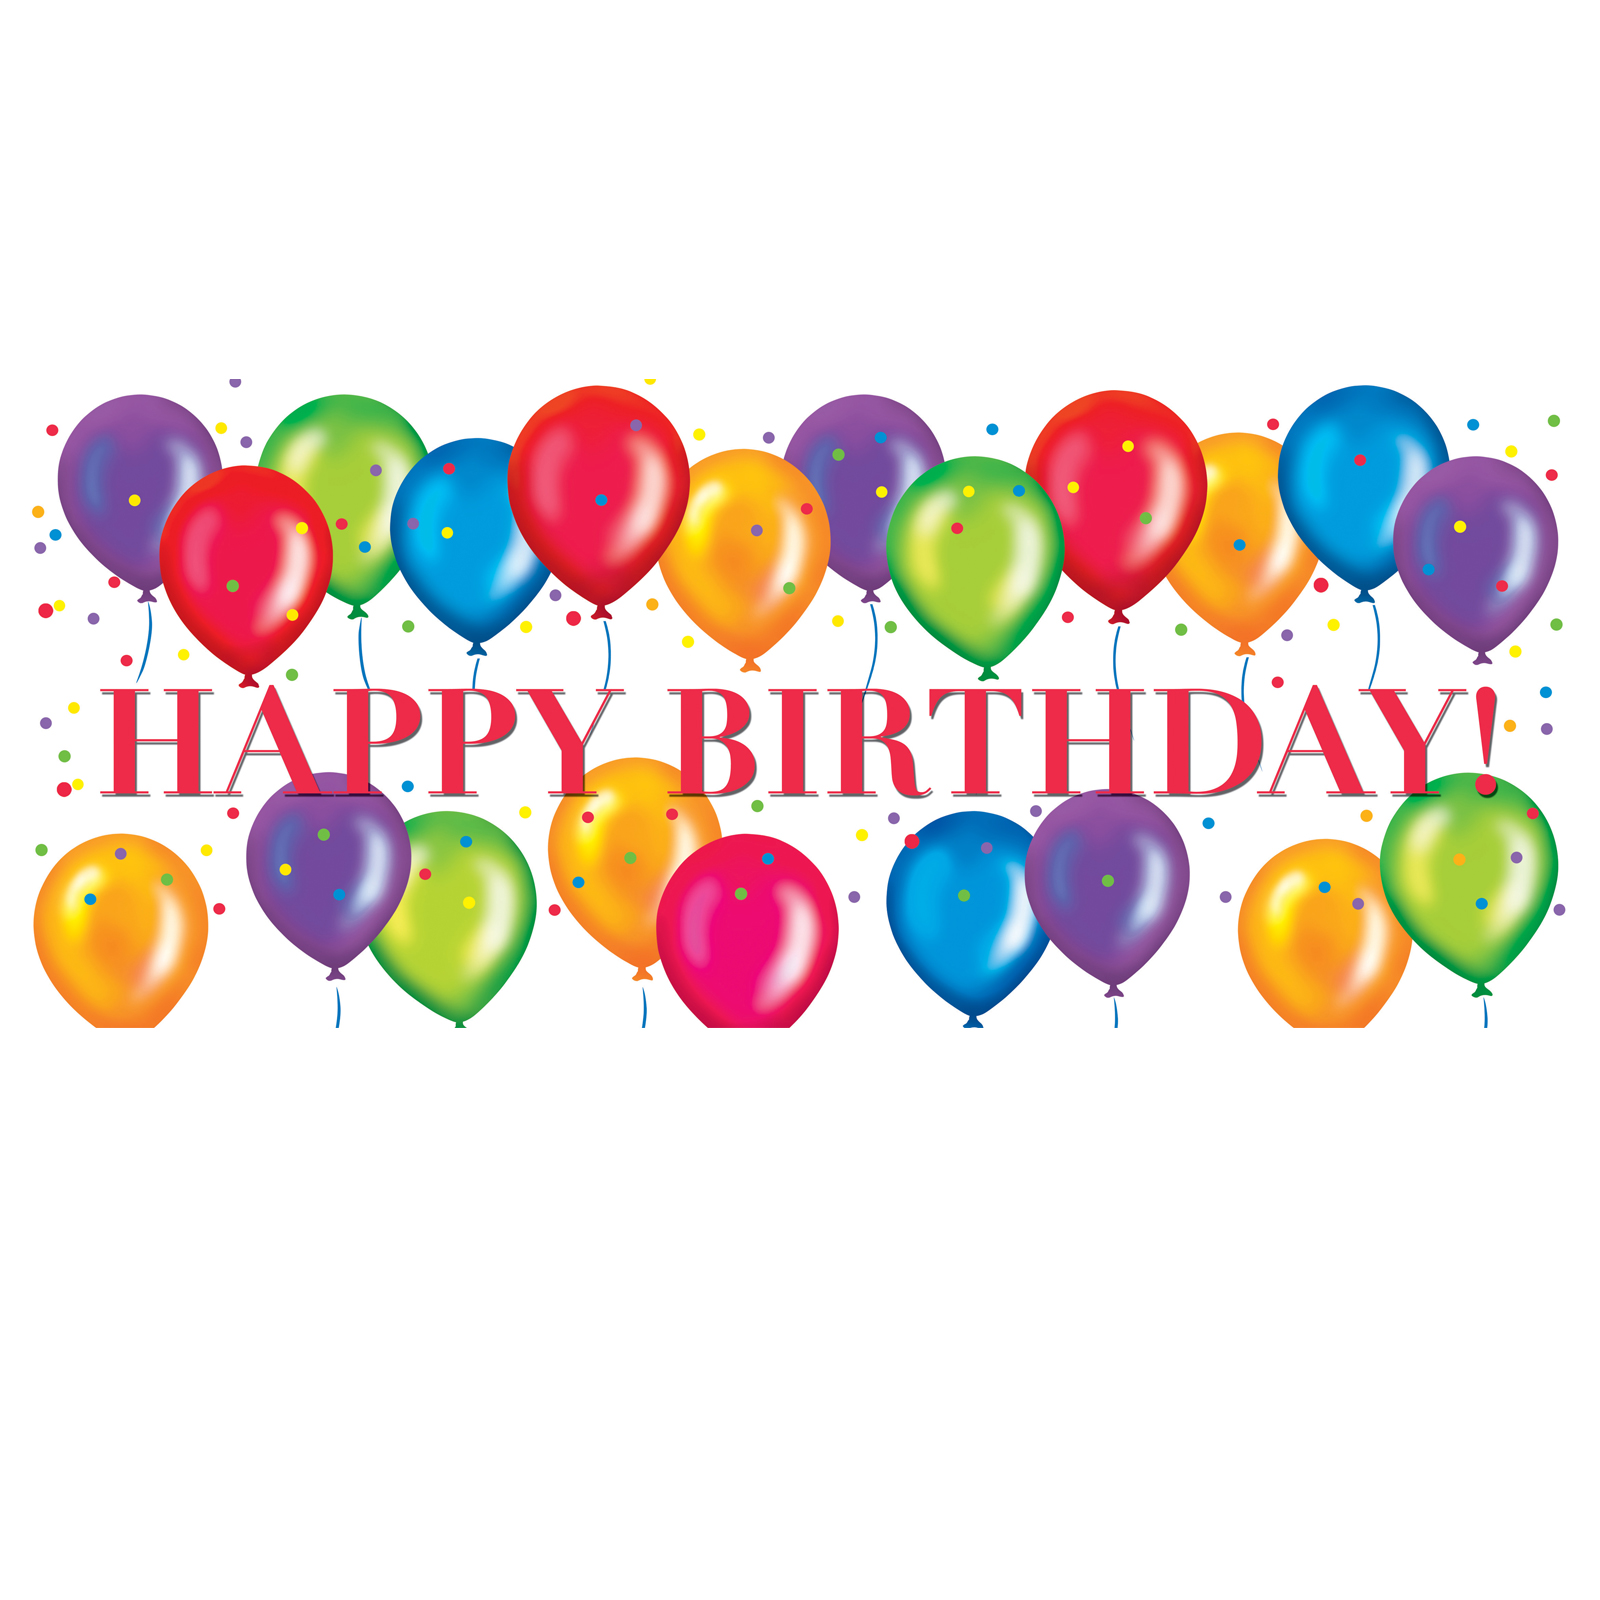 animated birthday balloons images